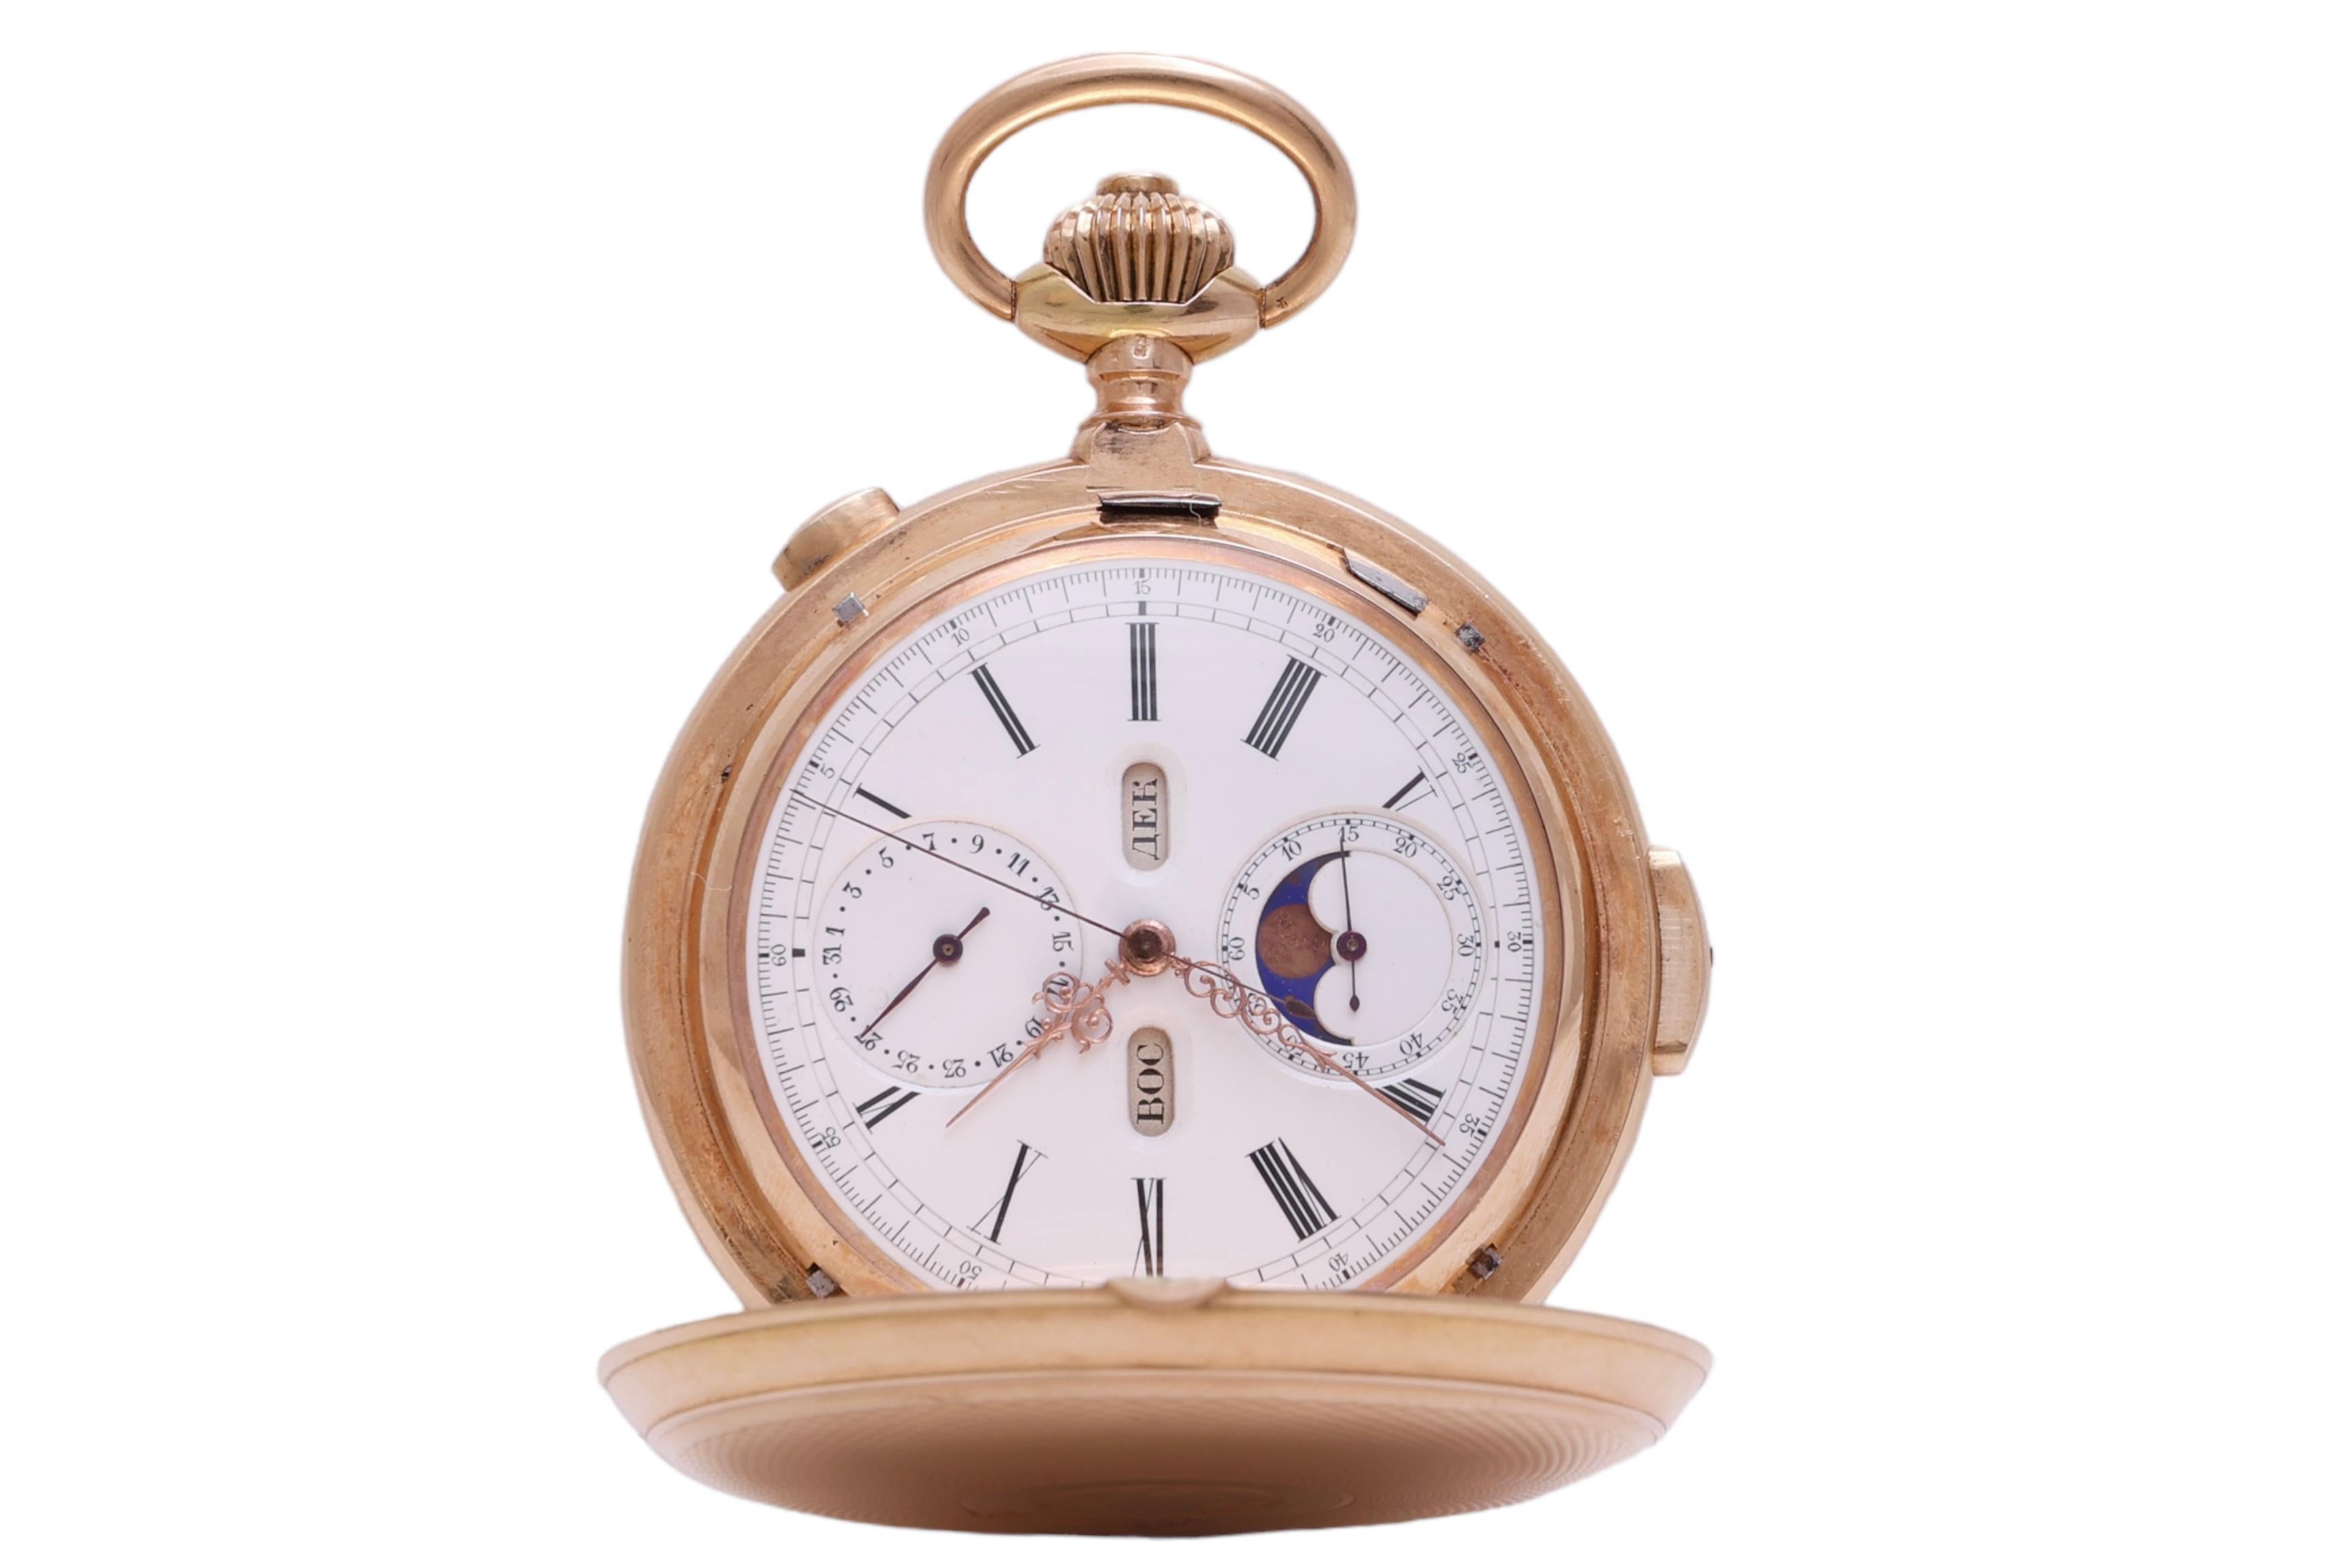 18 Kt Pink Gold Hunter Pocket Watch Triple Calendar / Quantieme Moon Phase Chronograph Minute Repeater

Weight : 138.1 Gram 

Extremely Solid & Heavy 18 Kt Pink Gold Hunter Case Pocket Watch
Movement : Minute Repeater, Tripple Calendar / Quantieme